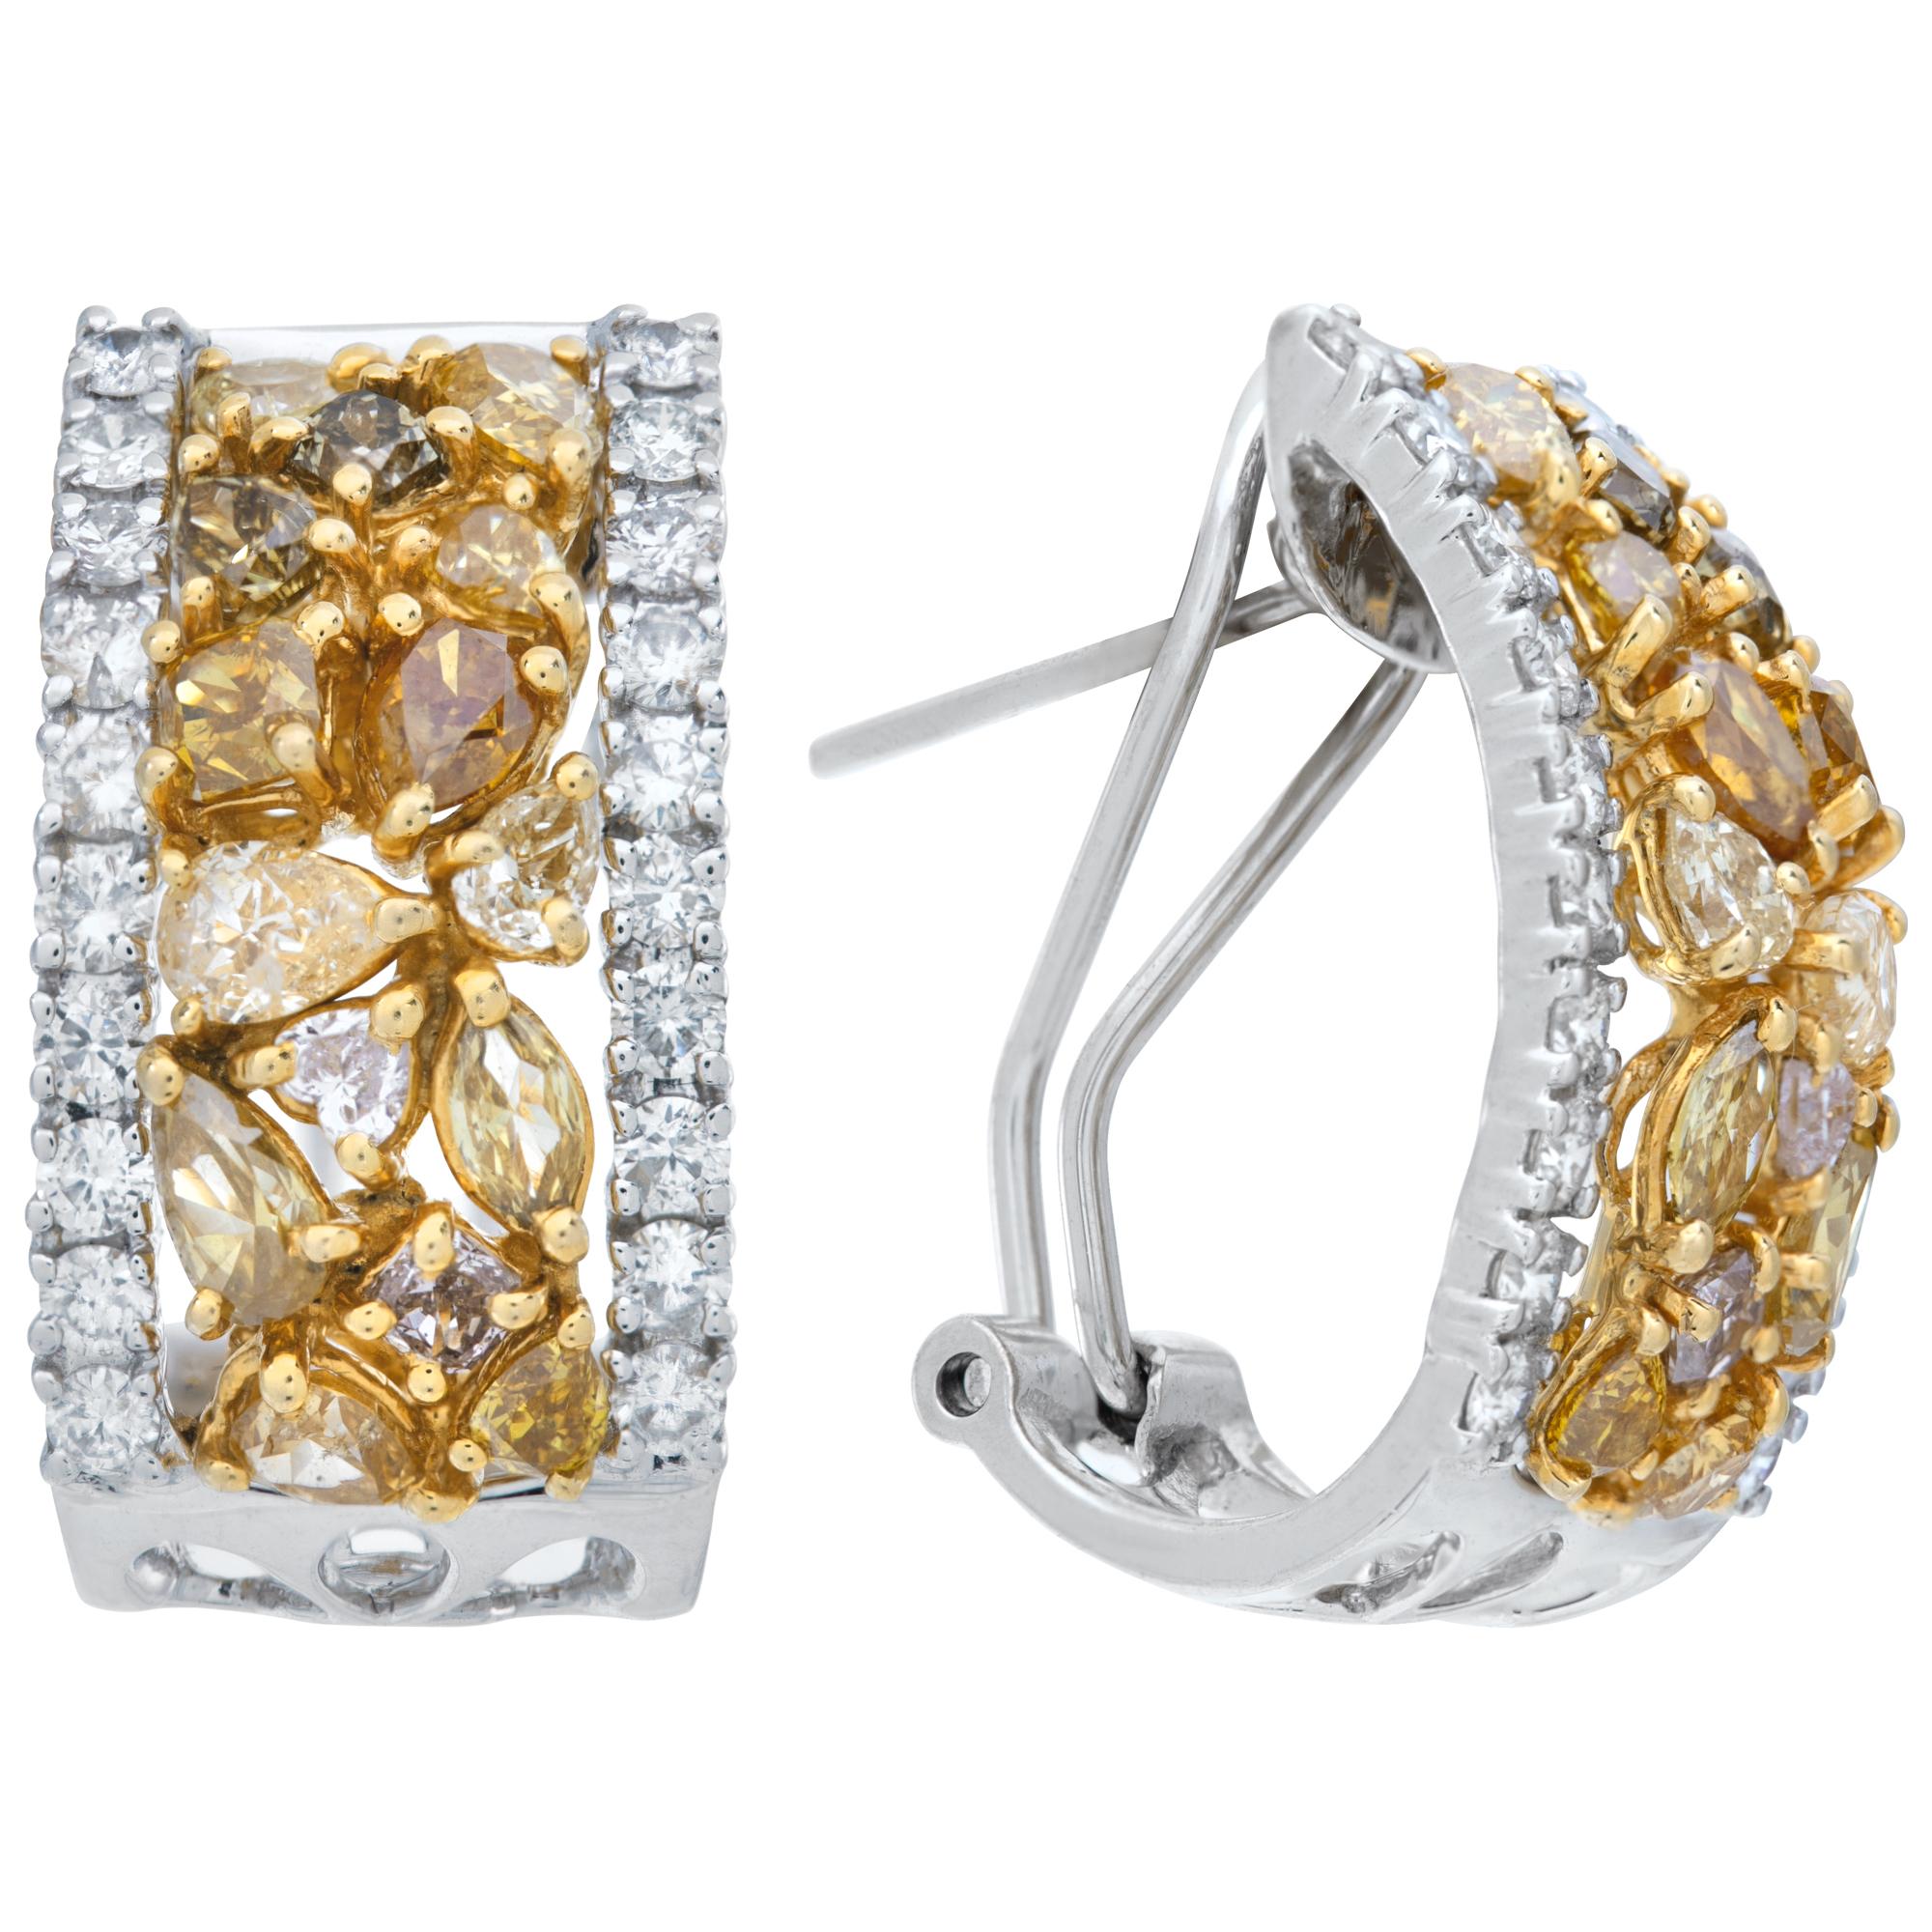 Stunning 18k white & yellow gold 'huggies' earrings with 3.44 carats in marquise, pear and cushion cut Fancy Yellow Diamonds and 0.71 carat in round brilliant cut diamonds. Length 21.6mm, width 12mm.